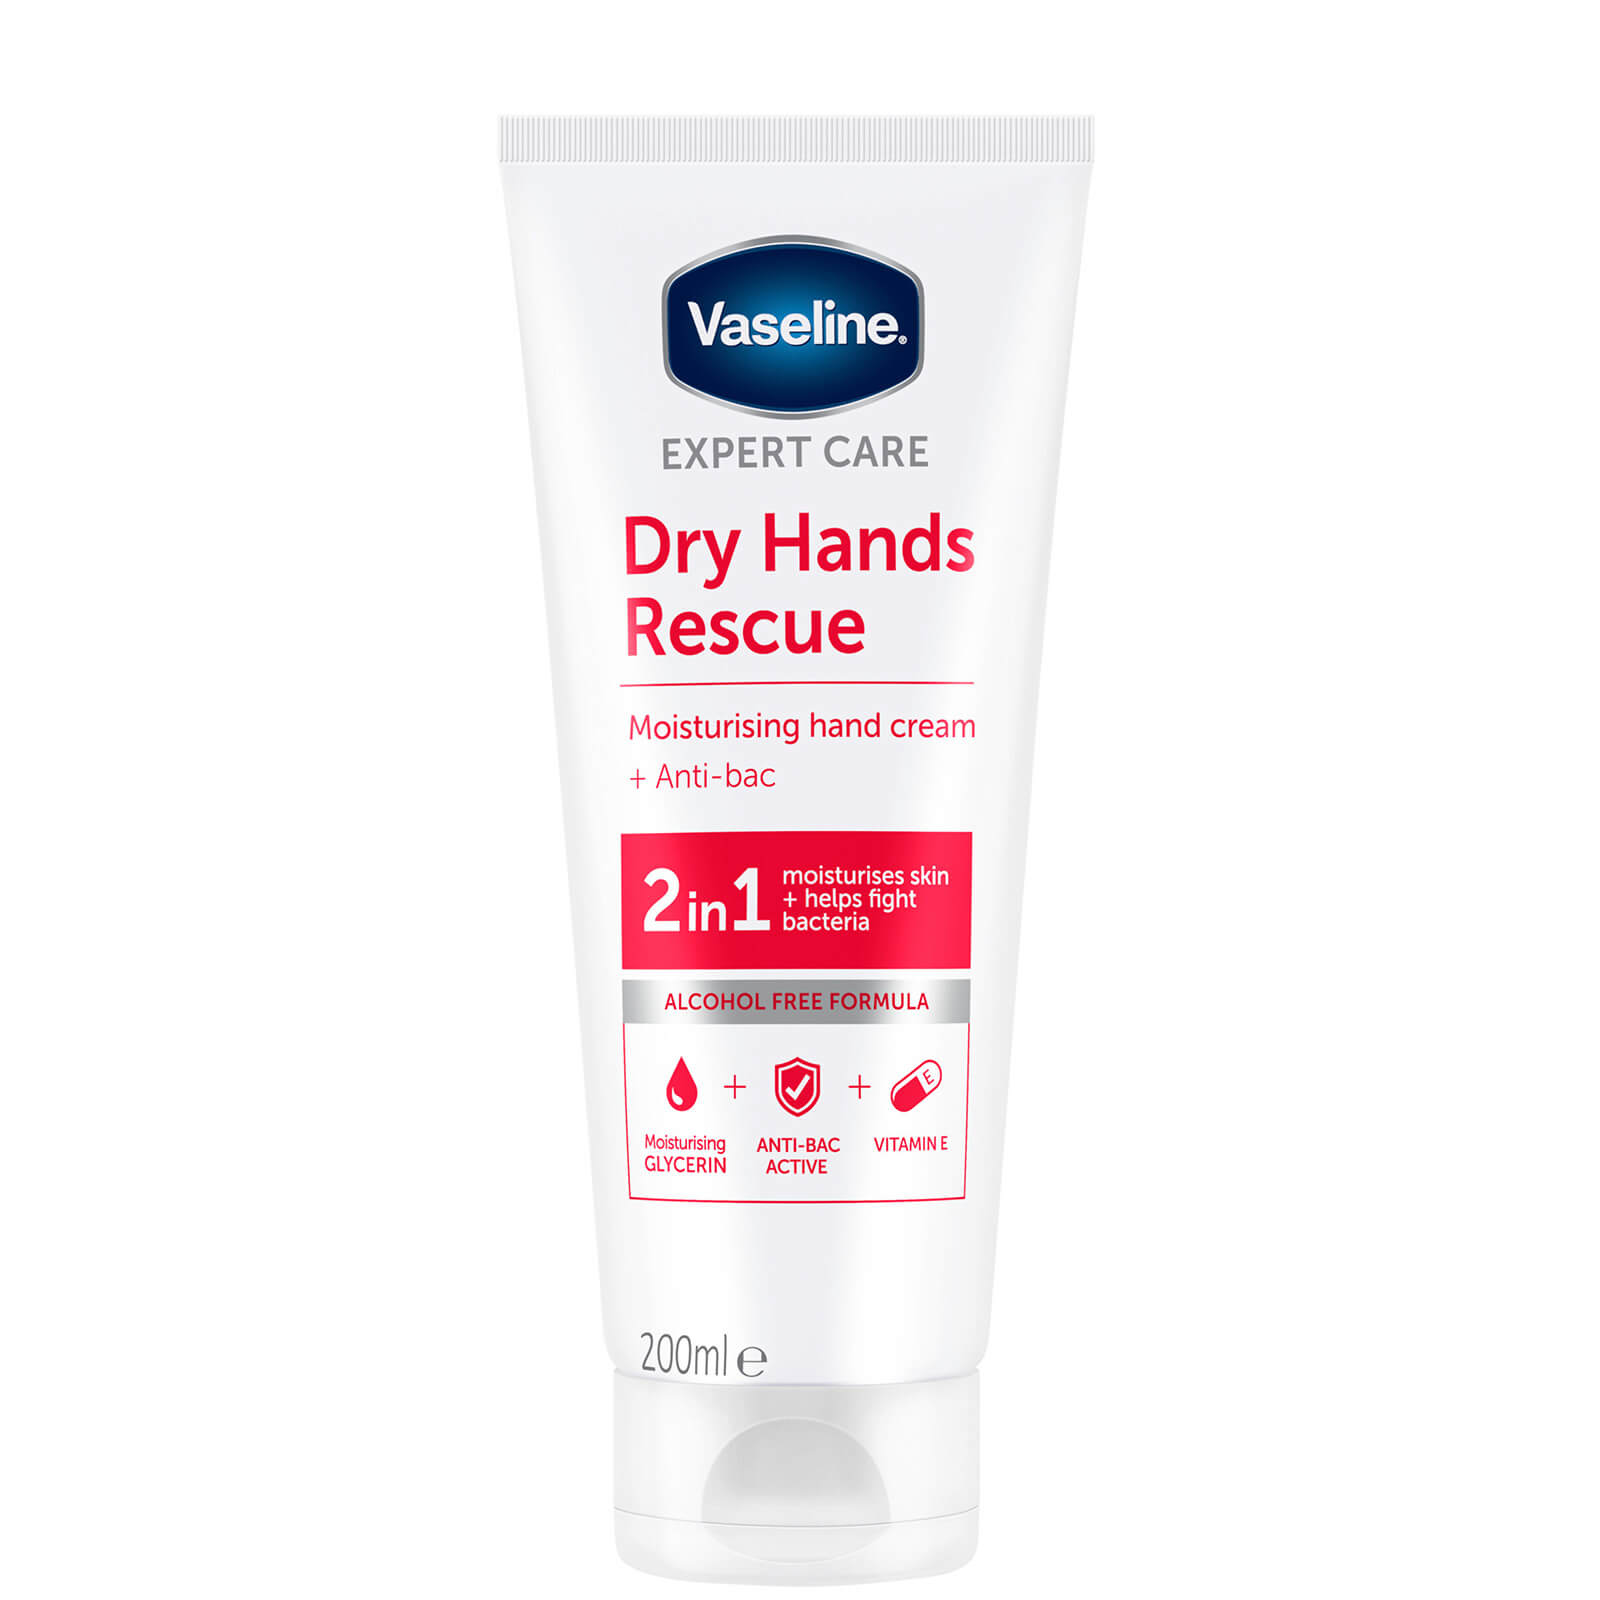 Vaseline Expert Care Dry Hands Rescue Hand Cream & Anti Bac